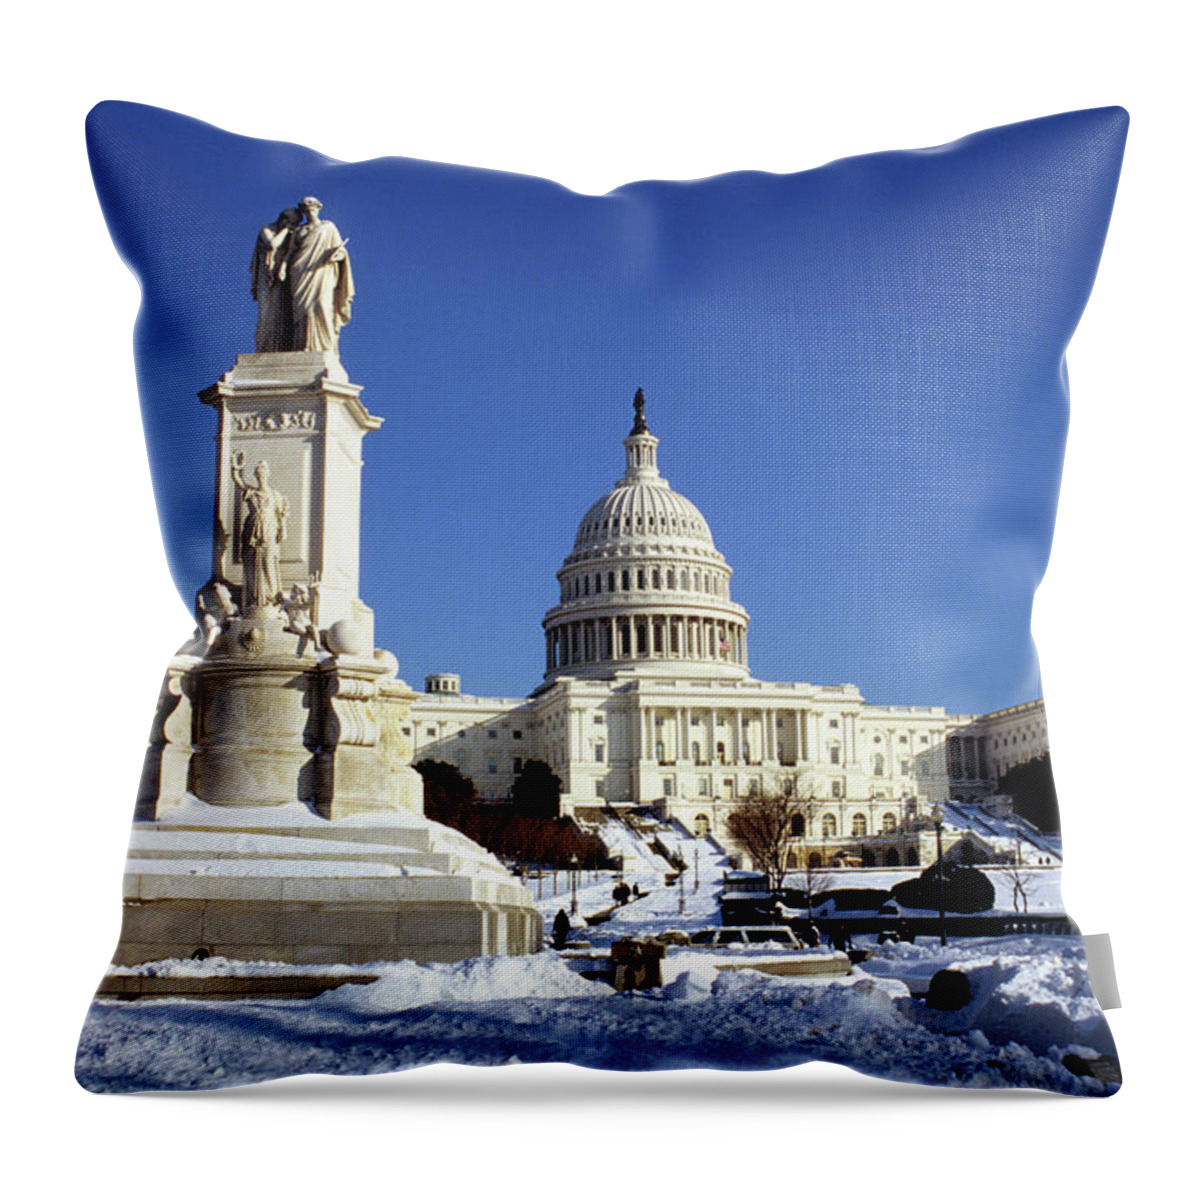 Statue Throw Pillow featuring the photograph Us Capitol Building In Winter Snow by Hisham Ibrahim